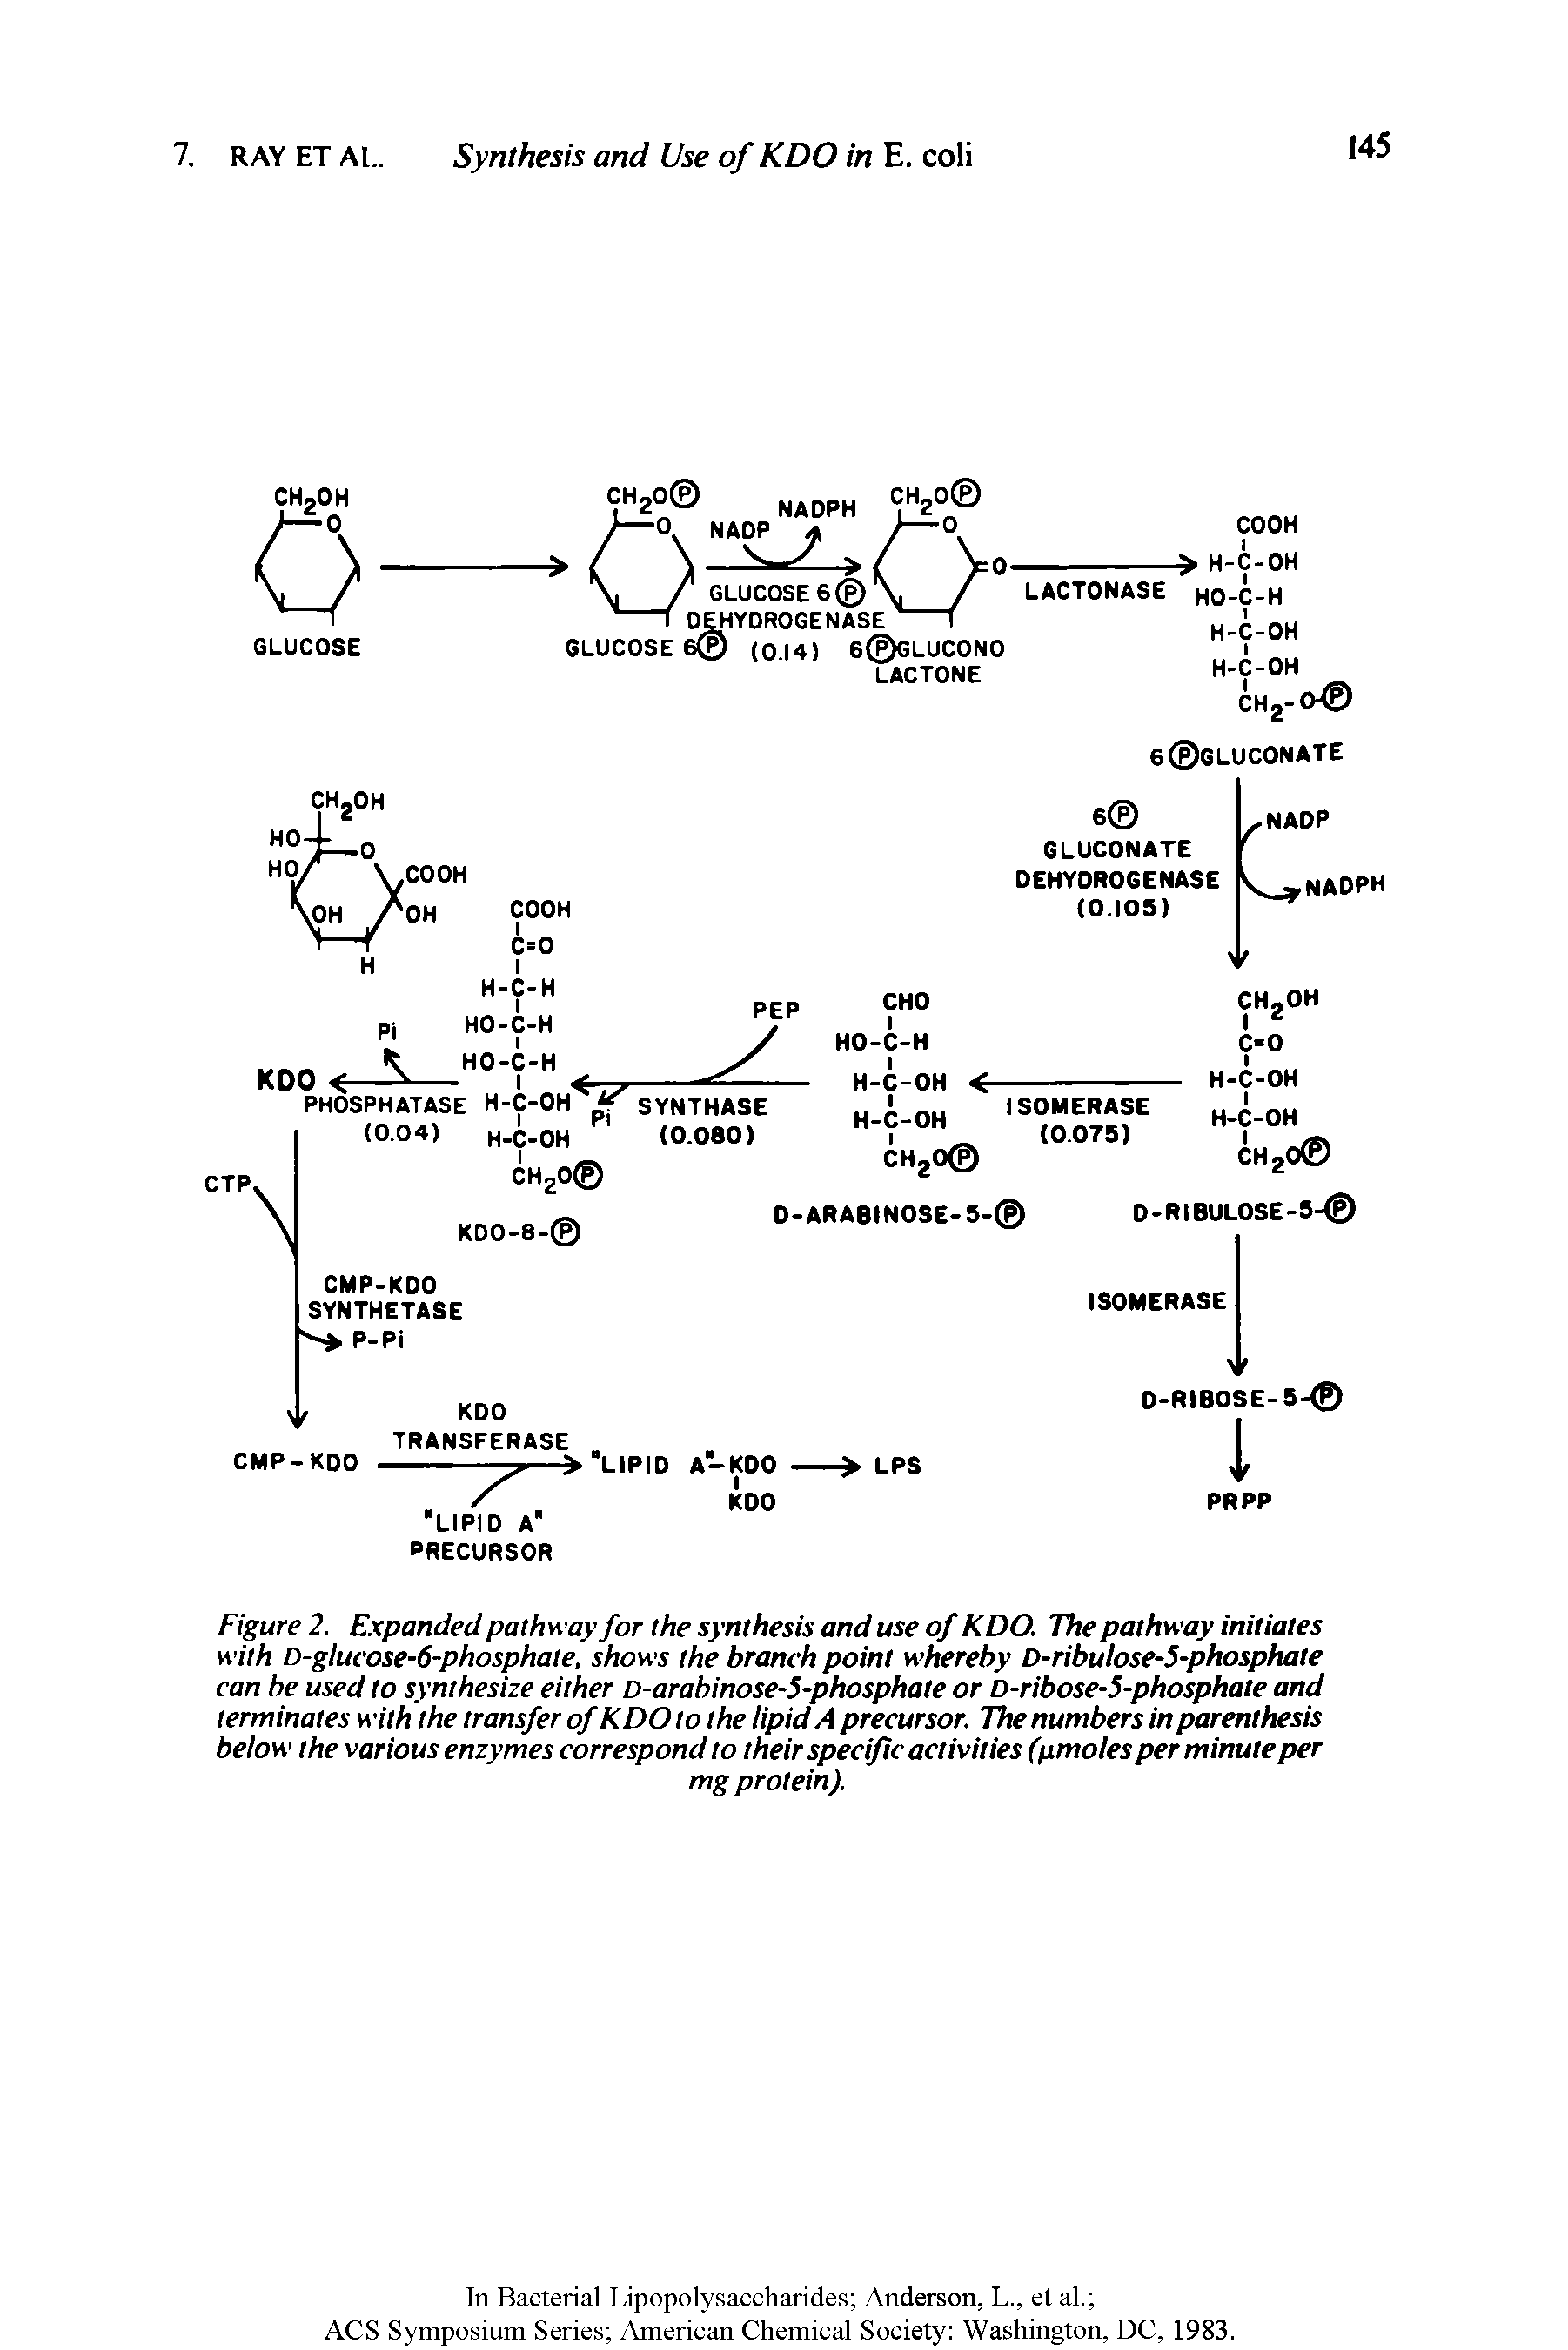 Figure 2. Expanded pathway for the synthesis and use of KDO. The pathway initiates with D-giucose-6-phosphate, shows the branch point whereby D-ribulose-5-phosphate can be used to synthesize either D-arabinose-5-phosphate or D-ribose-5-phosphate and terminates with the transfer of KDO to the lipid A precursor. The numbers in parenthesis below the various enzymes correspond to their specific activities (nmoles per minute per...